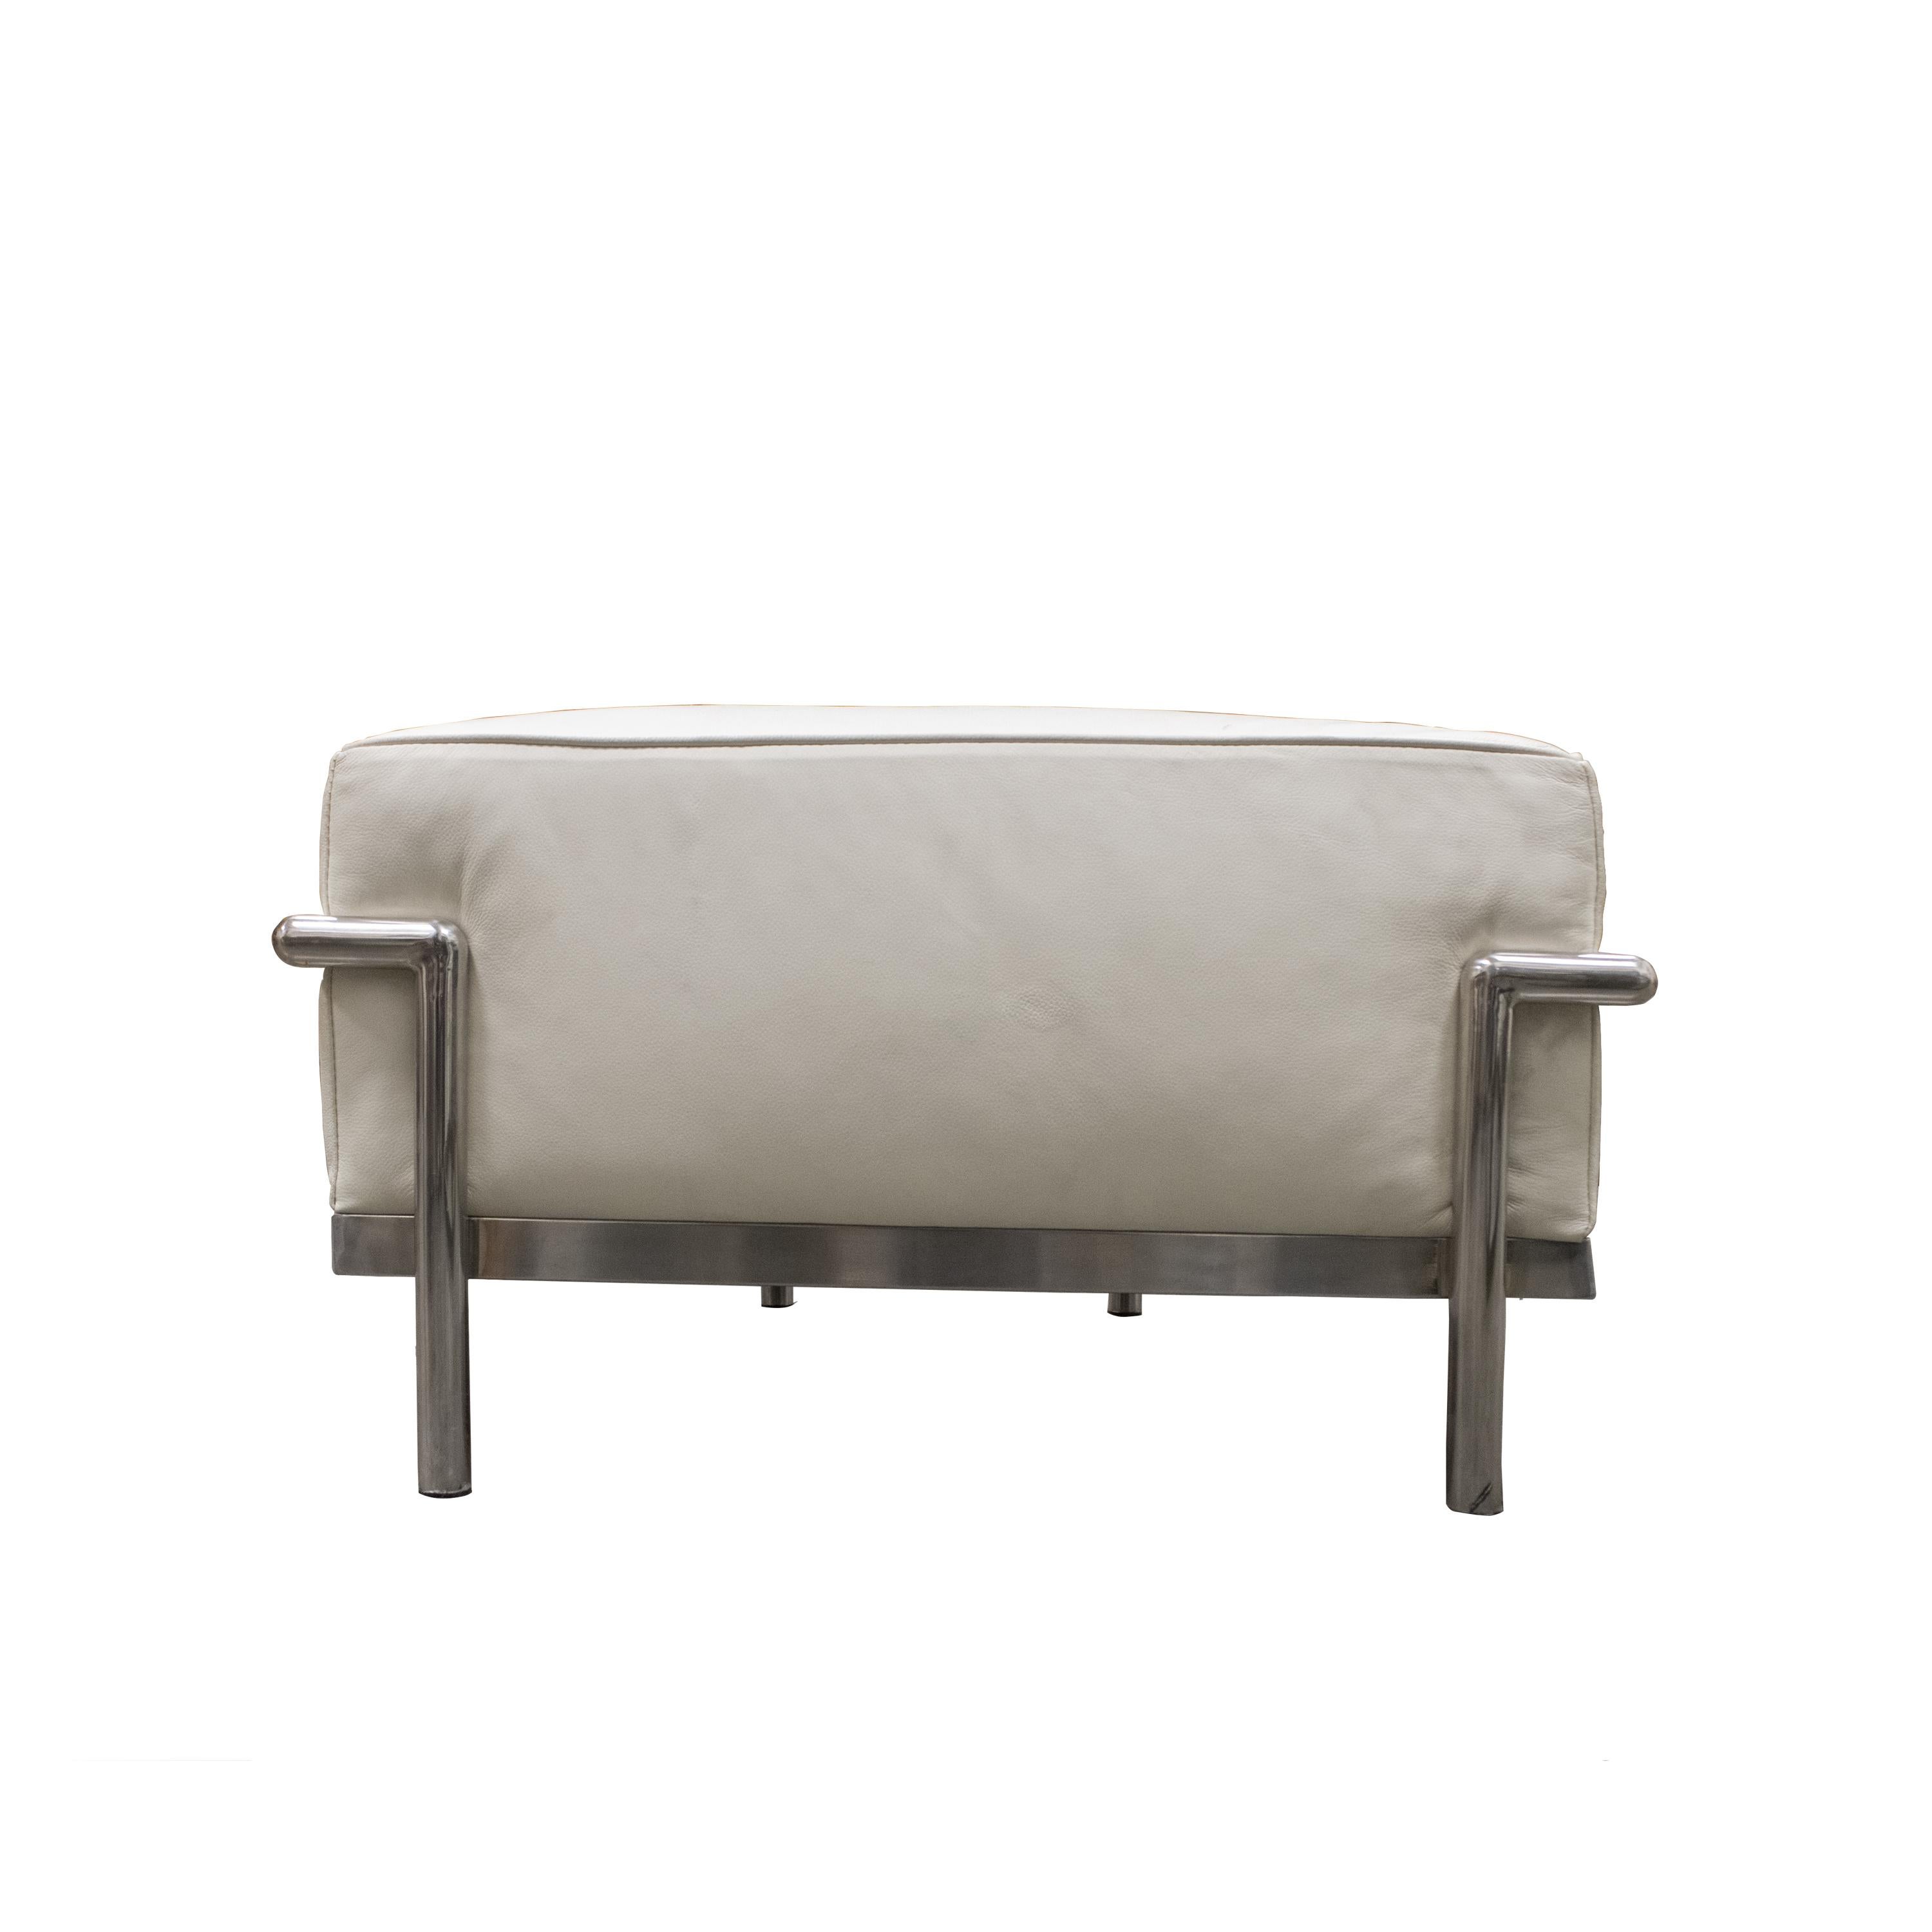 Mid-Century Modern Steel Ottoman Mies Van Der Rohe Style with Grain White Leather, Italy, 1979 For Sale